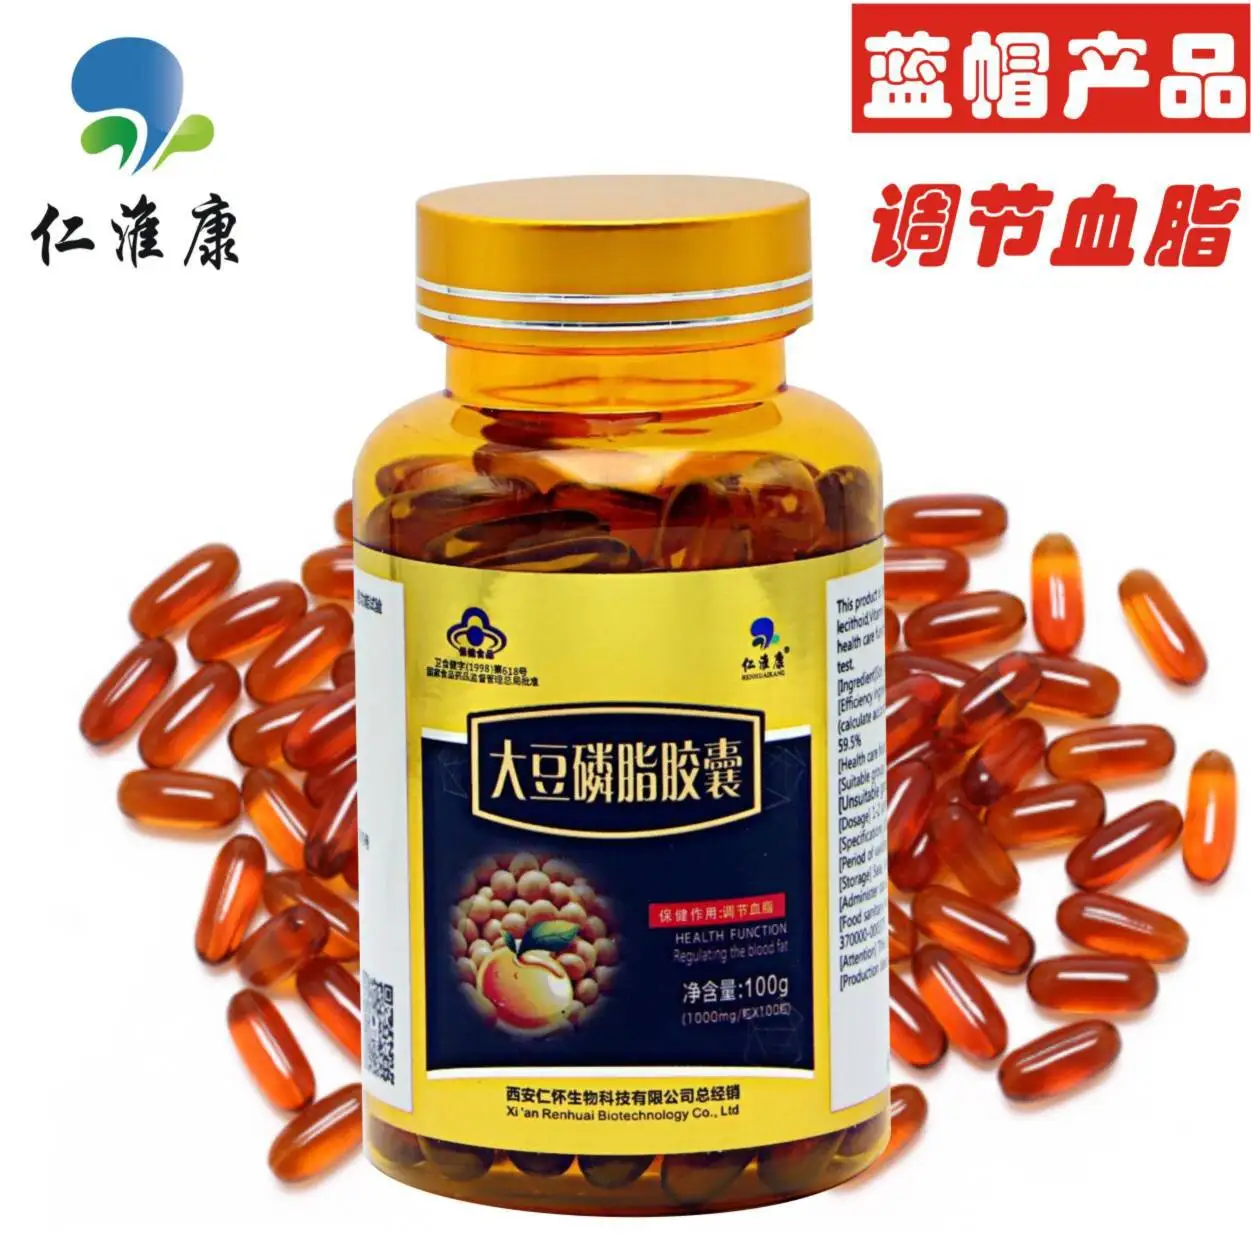 Renhuaikang Soybean Lecithin Capsule Lecithin Soft Capsule Health Care Products Oral 100 Tablets Spot Supply 3 Bottles 24 126999